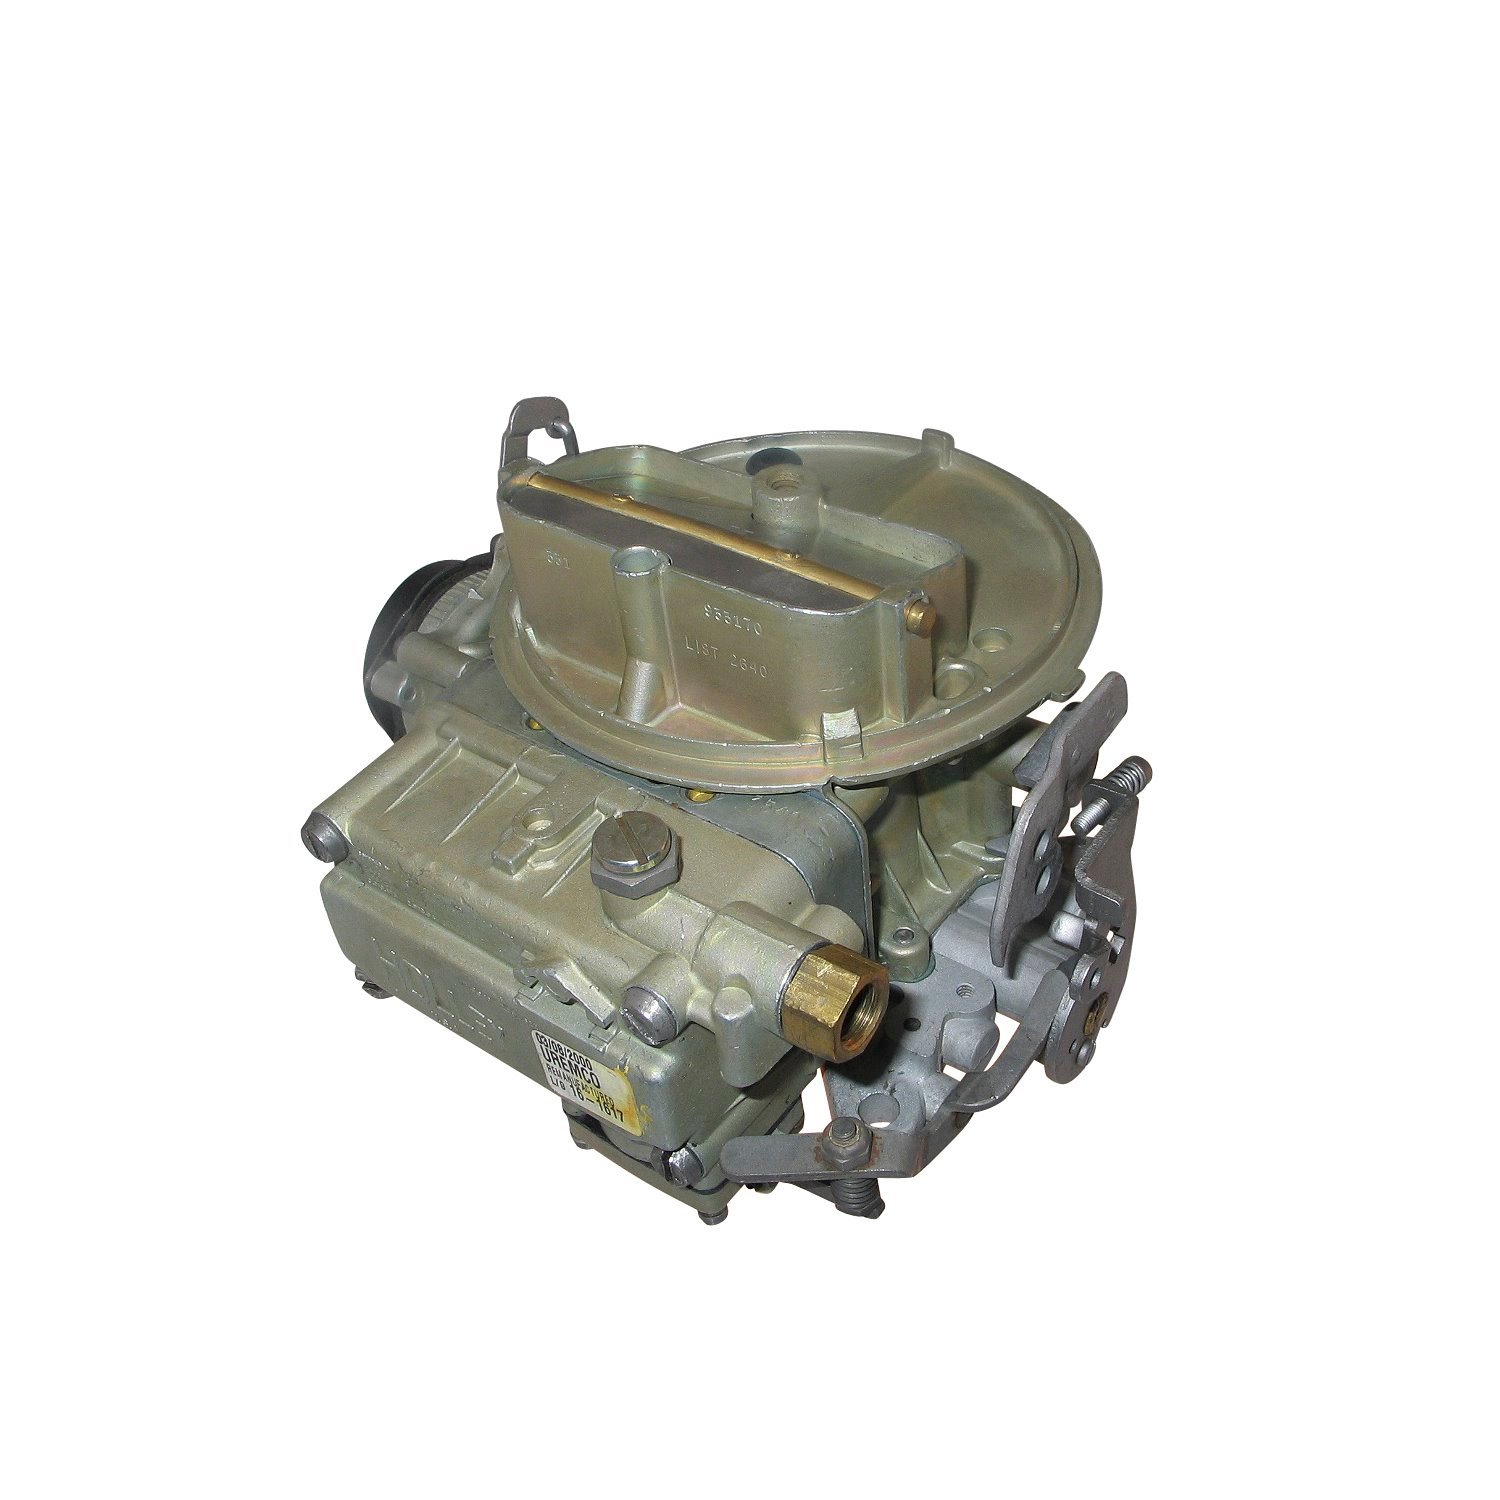 16-1616 Holley Remanufactured Carburetor, 2300-Style